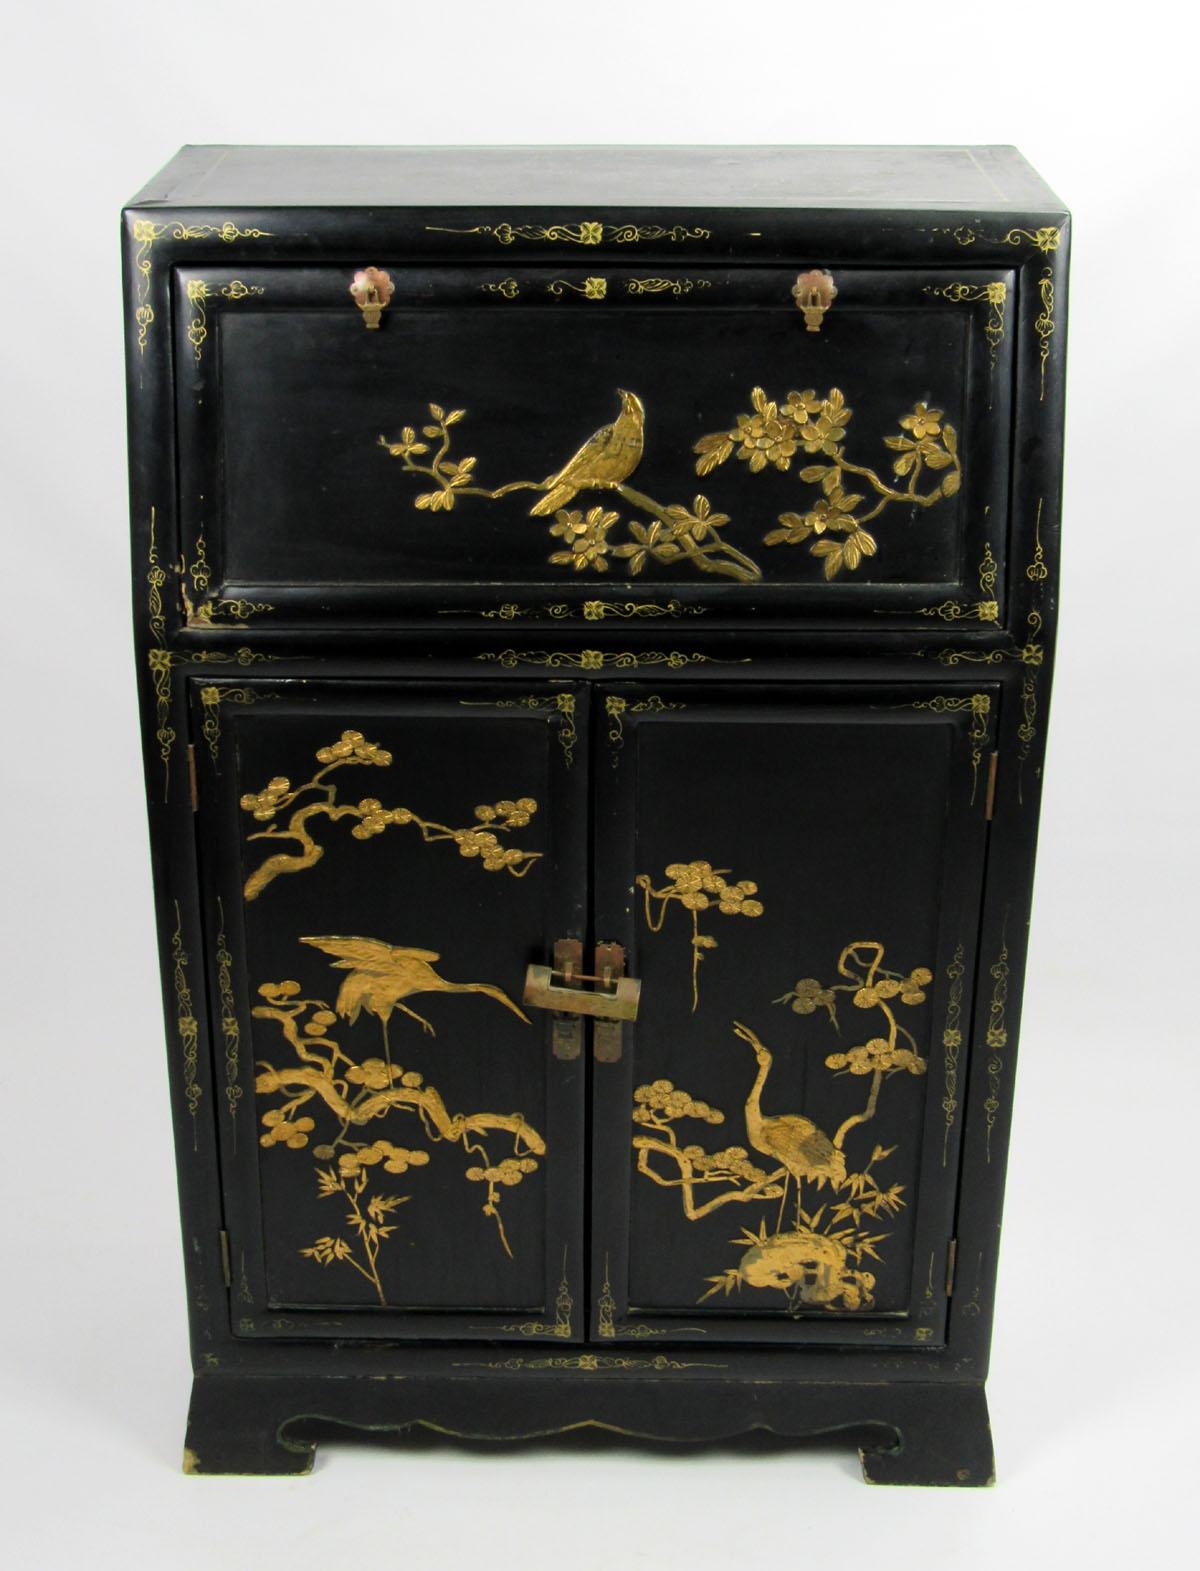 Early 20th century Chinoiserie petite secretary of ebonized wood with gold detail featuring birds and botanical elements.